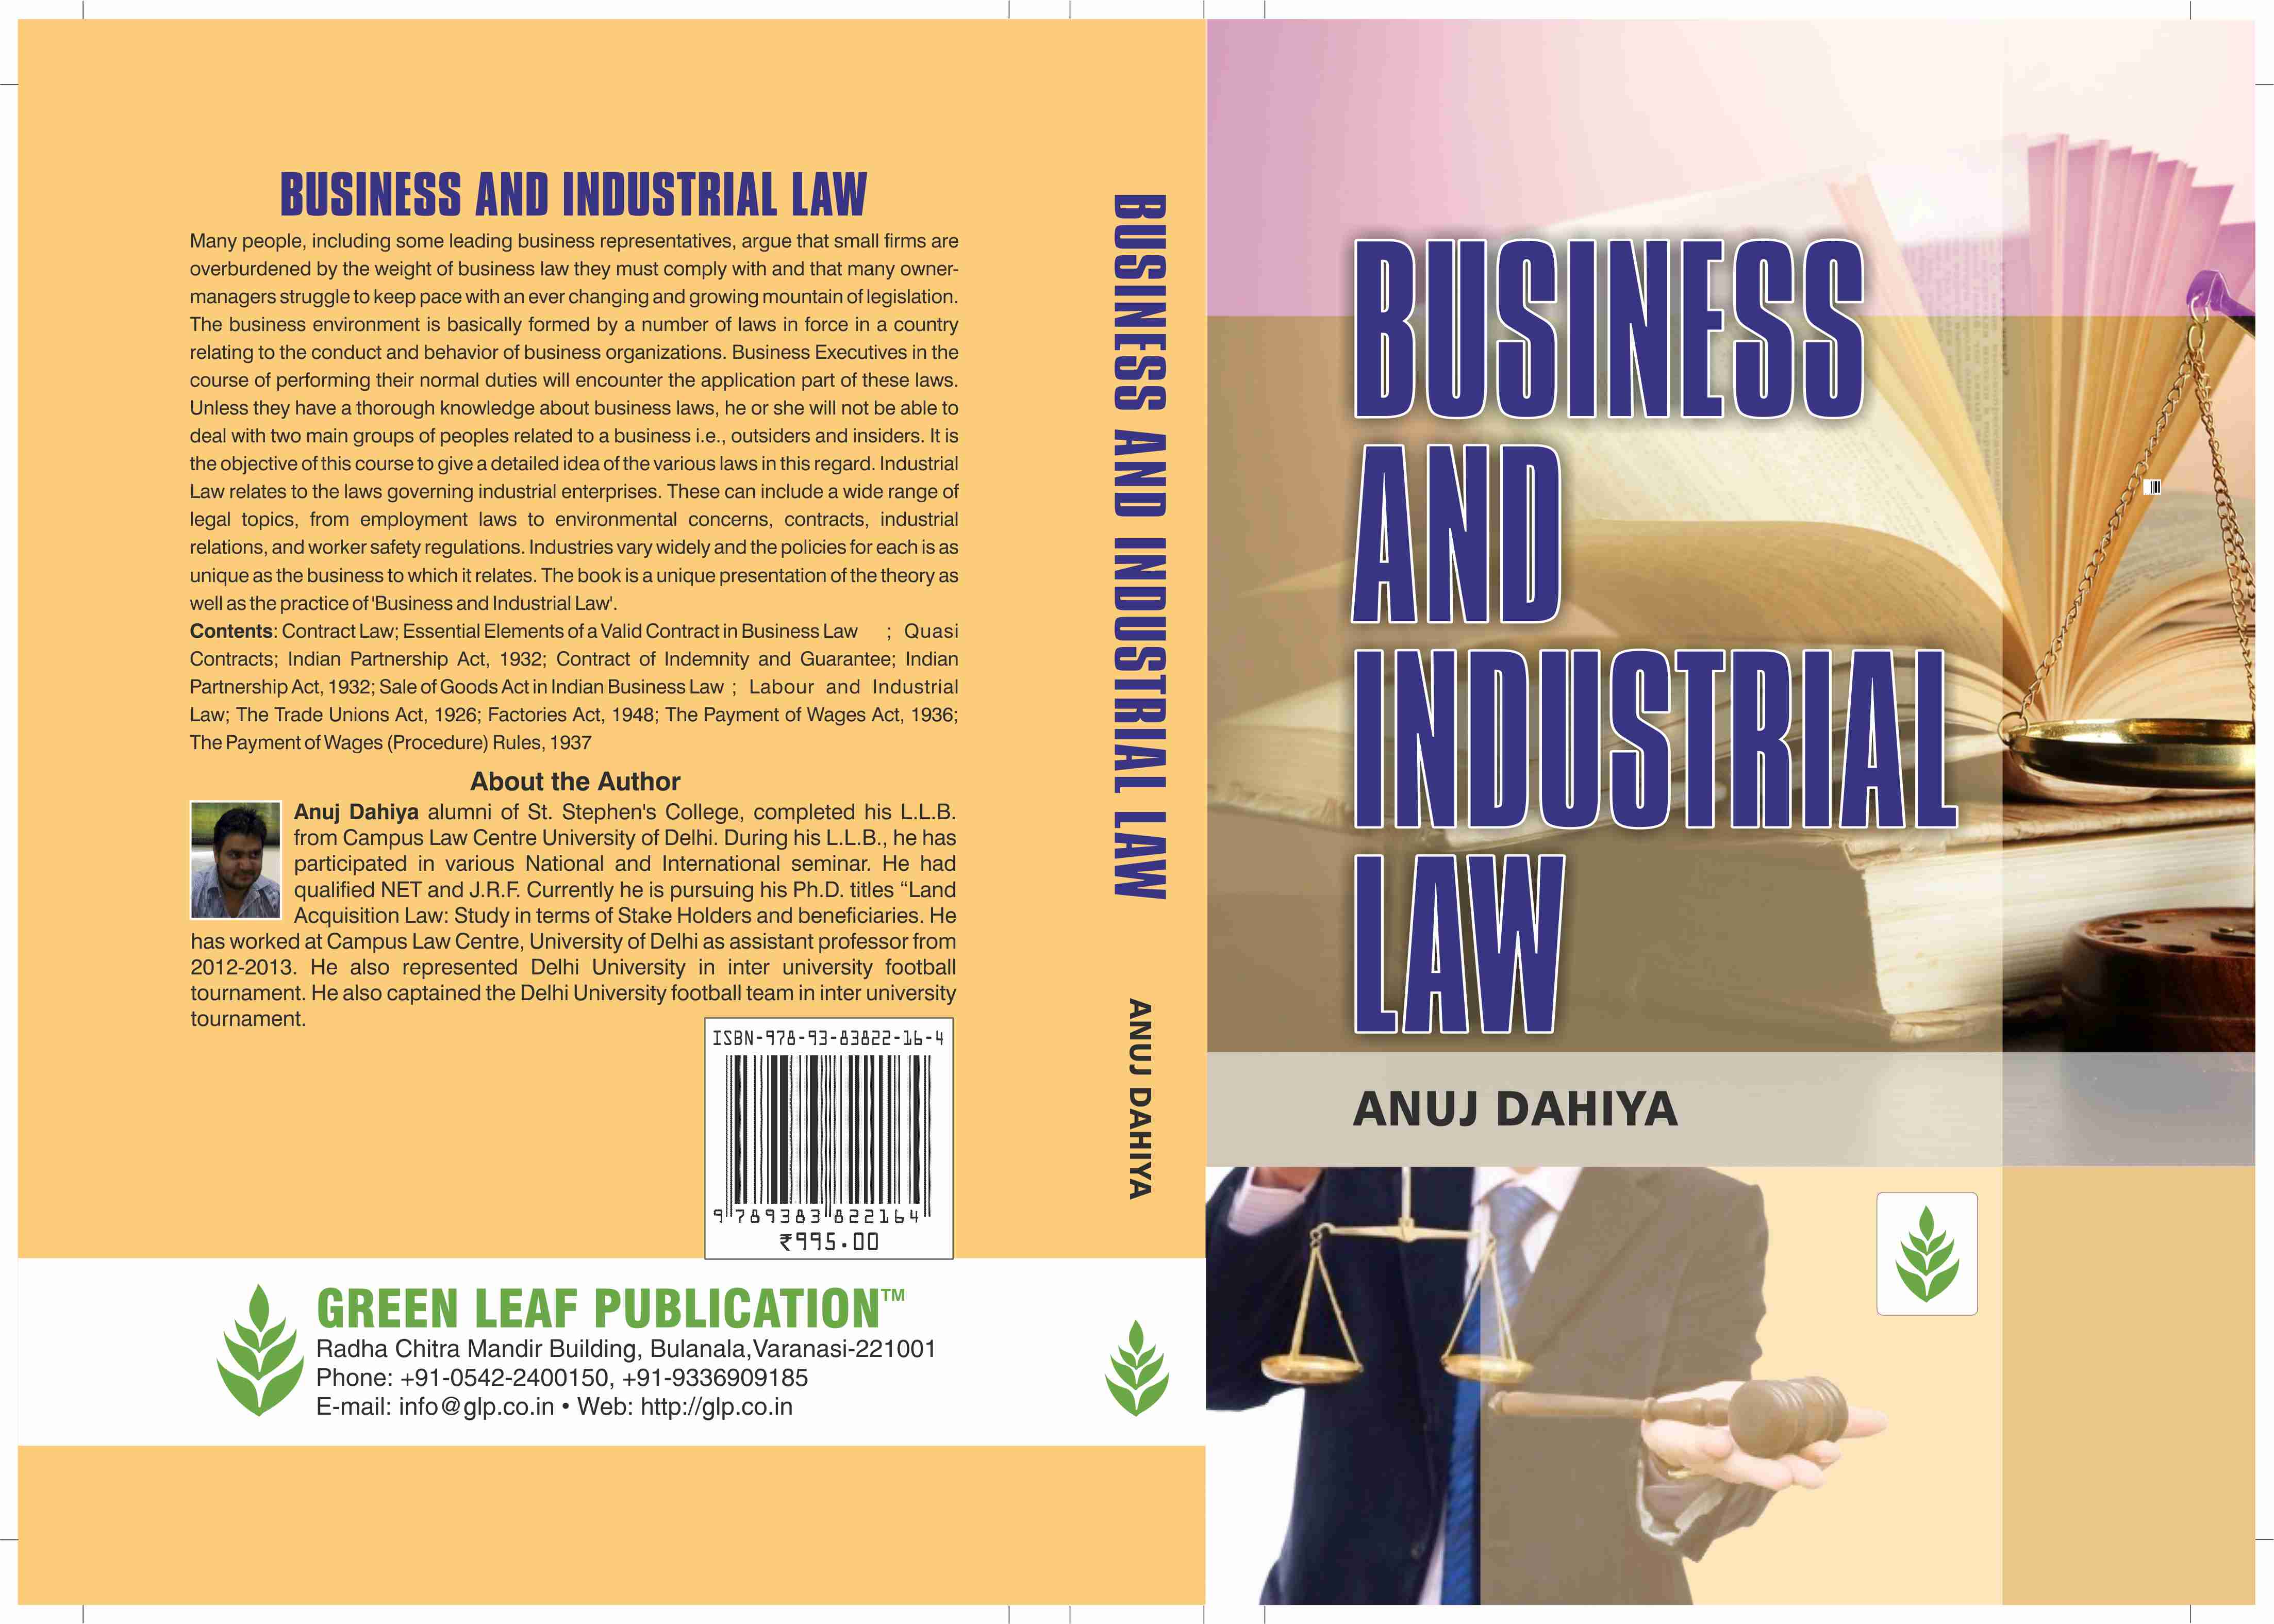 Business and Industrial Law (1).jpg